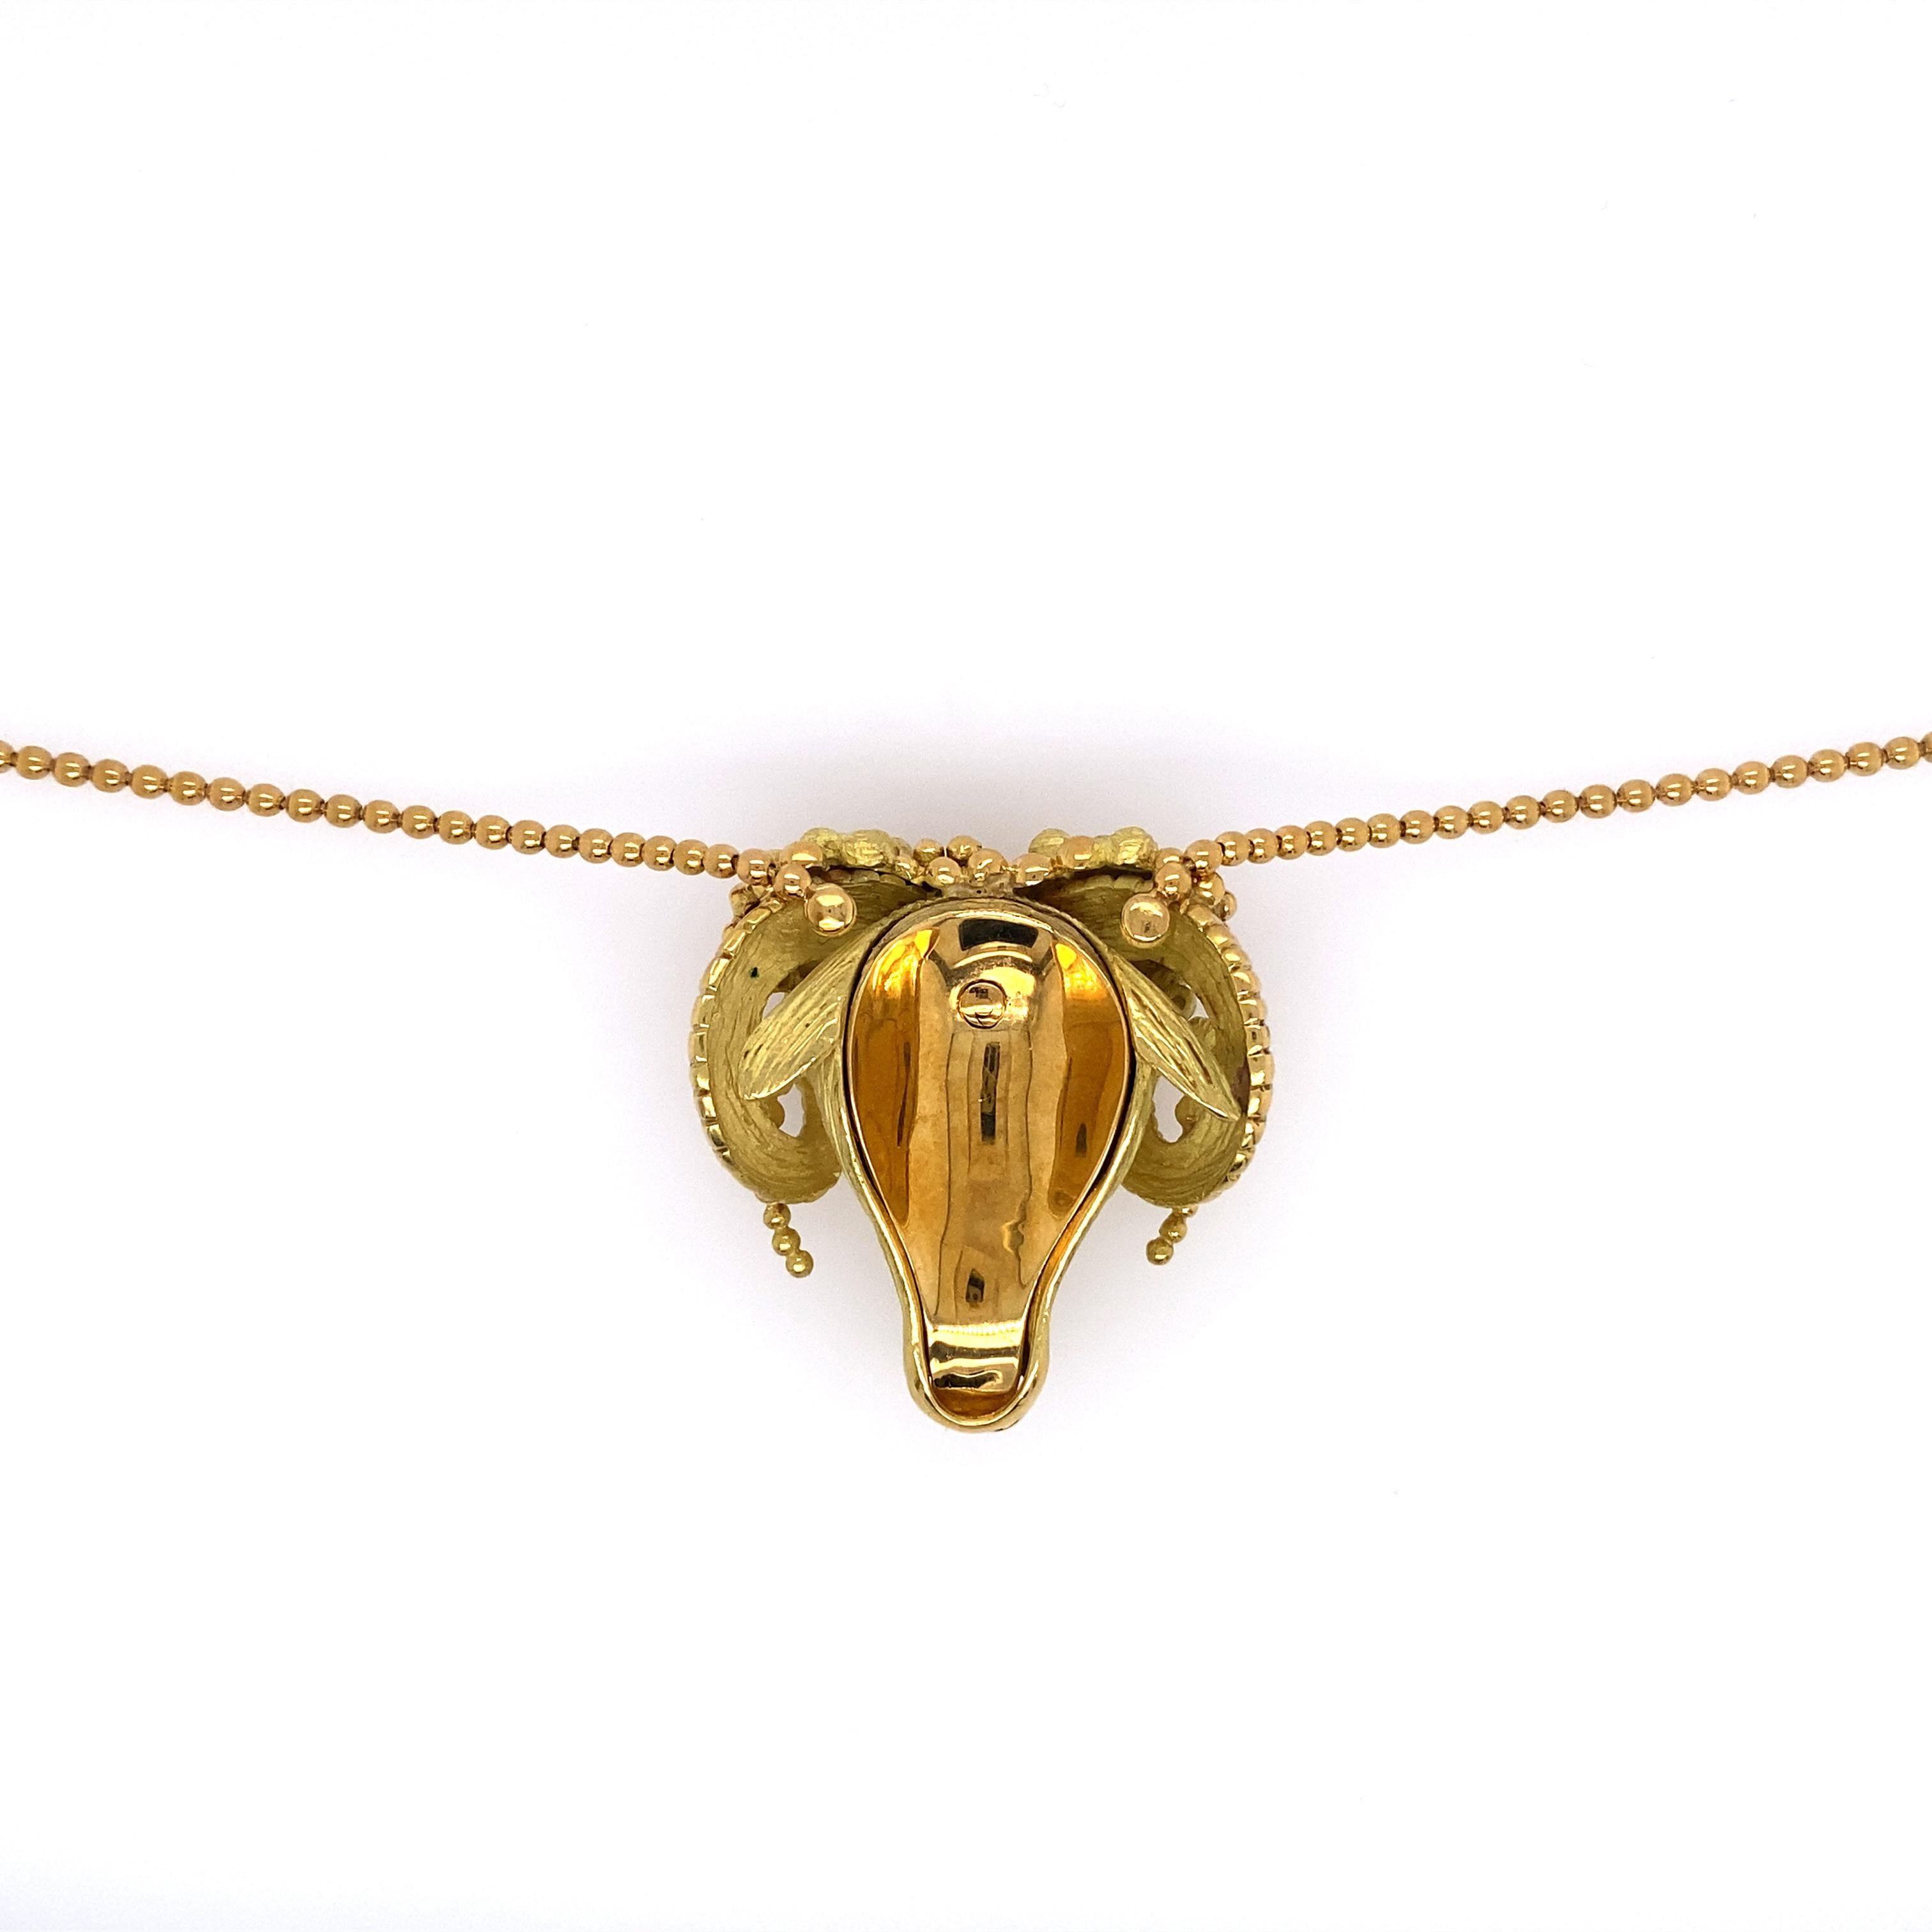 18k Gold Ram's Head Necklace  
Designed as a textured gold ram's head suspended by a ball chain, Total weight 26.0 dwt. Length 15 1/4in., 
with French mark and maker marks.